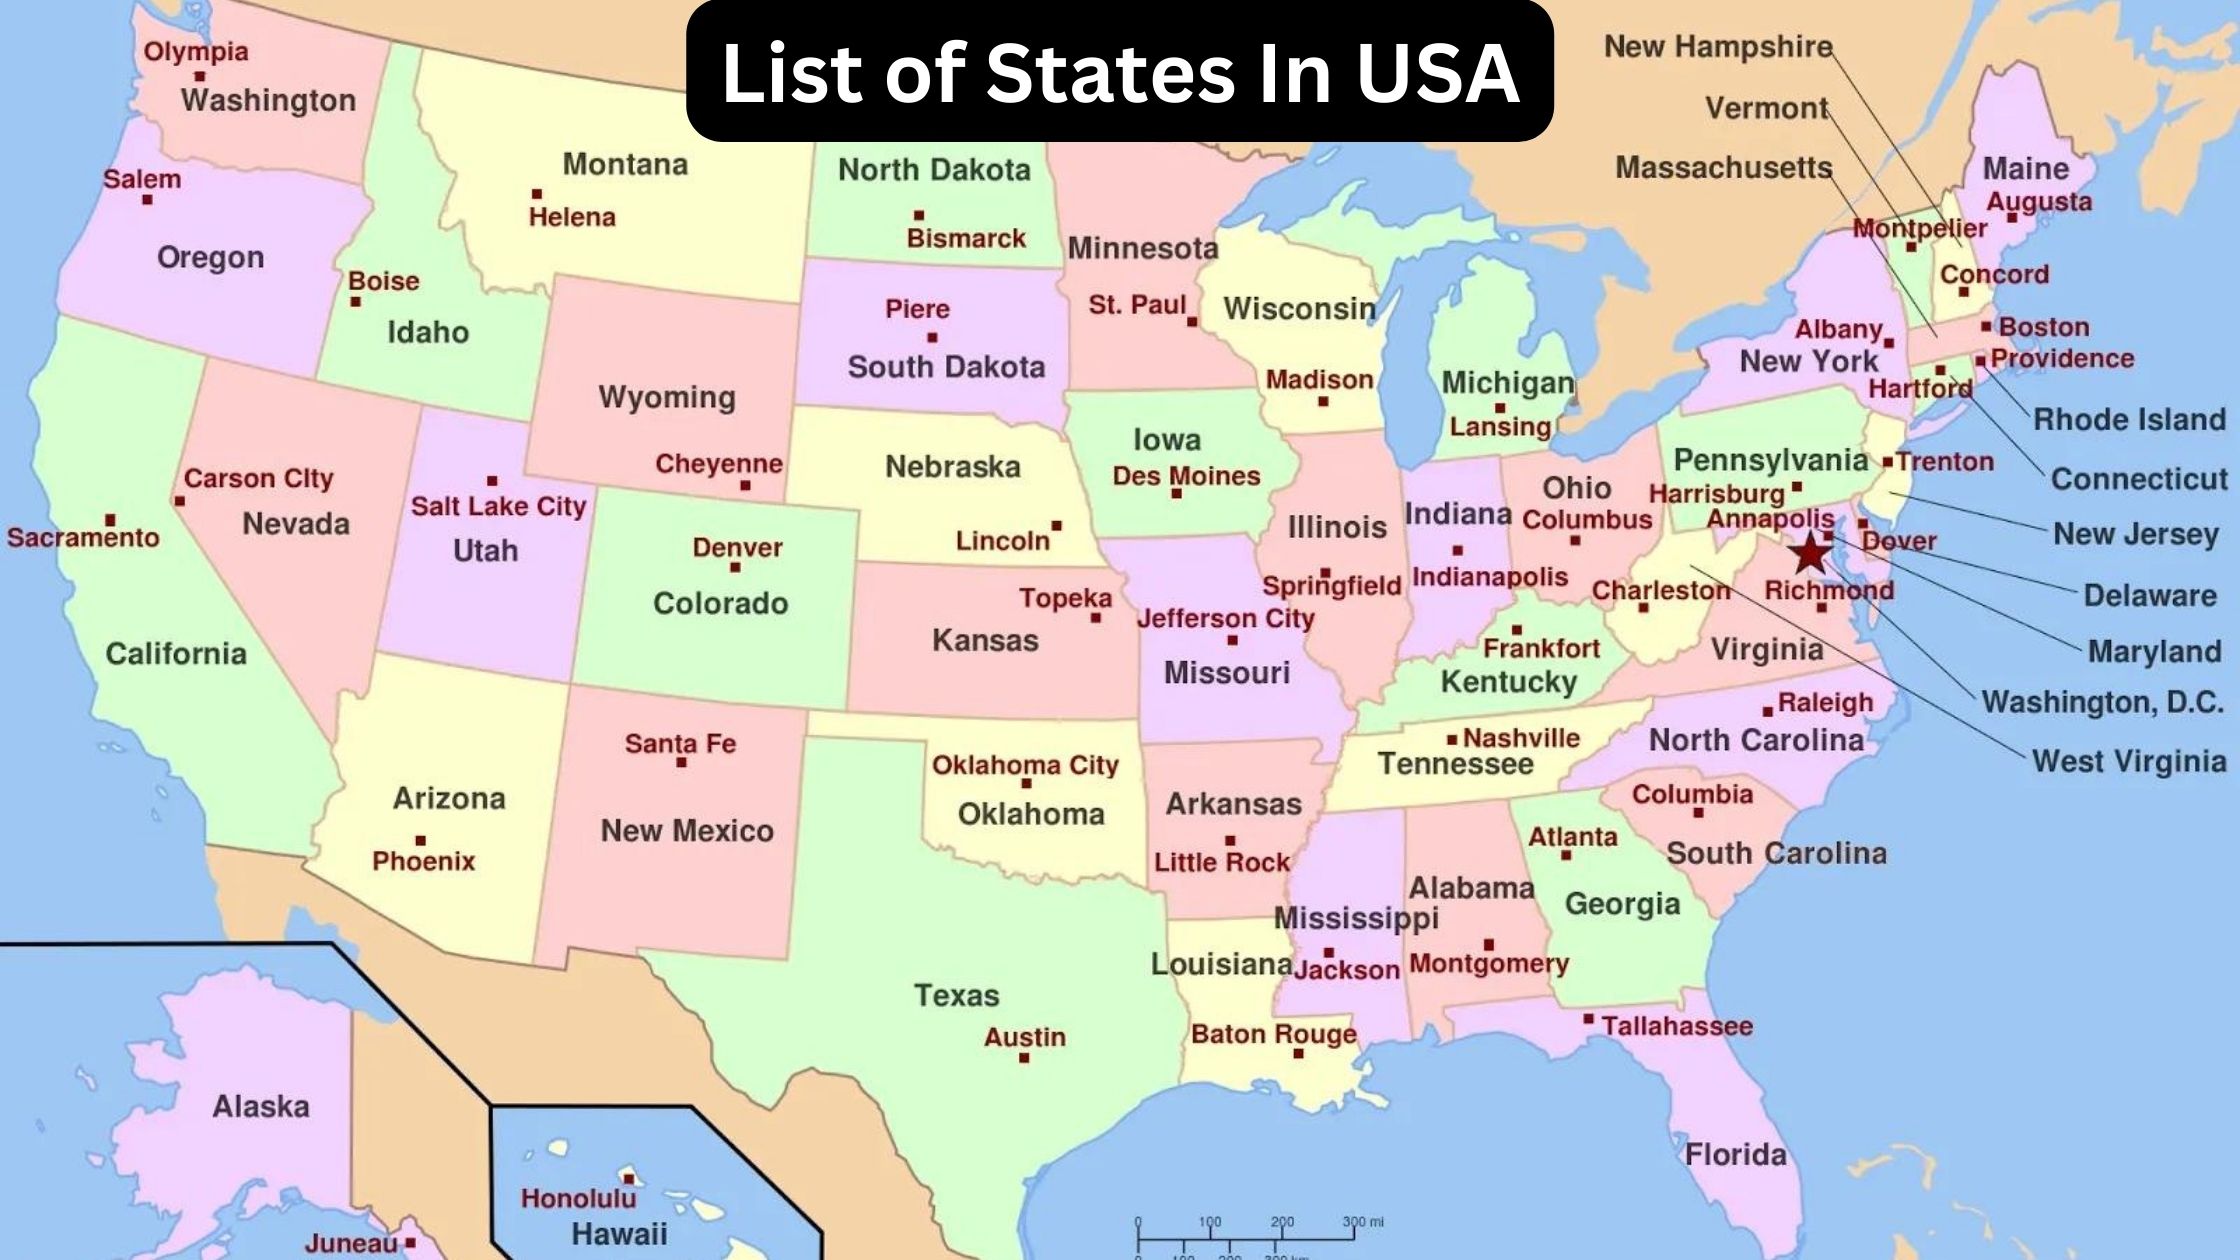 List of US states and capitals, List Of USA states, List Of USA states and capitals, US States List With Capitals, list of states in usa